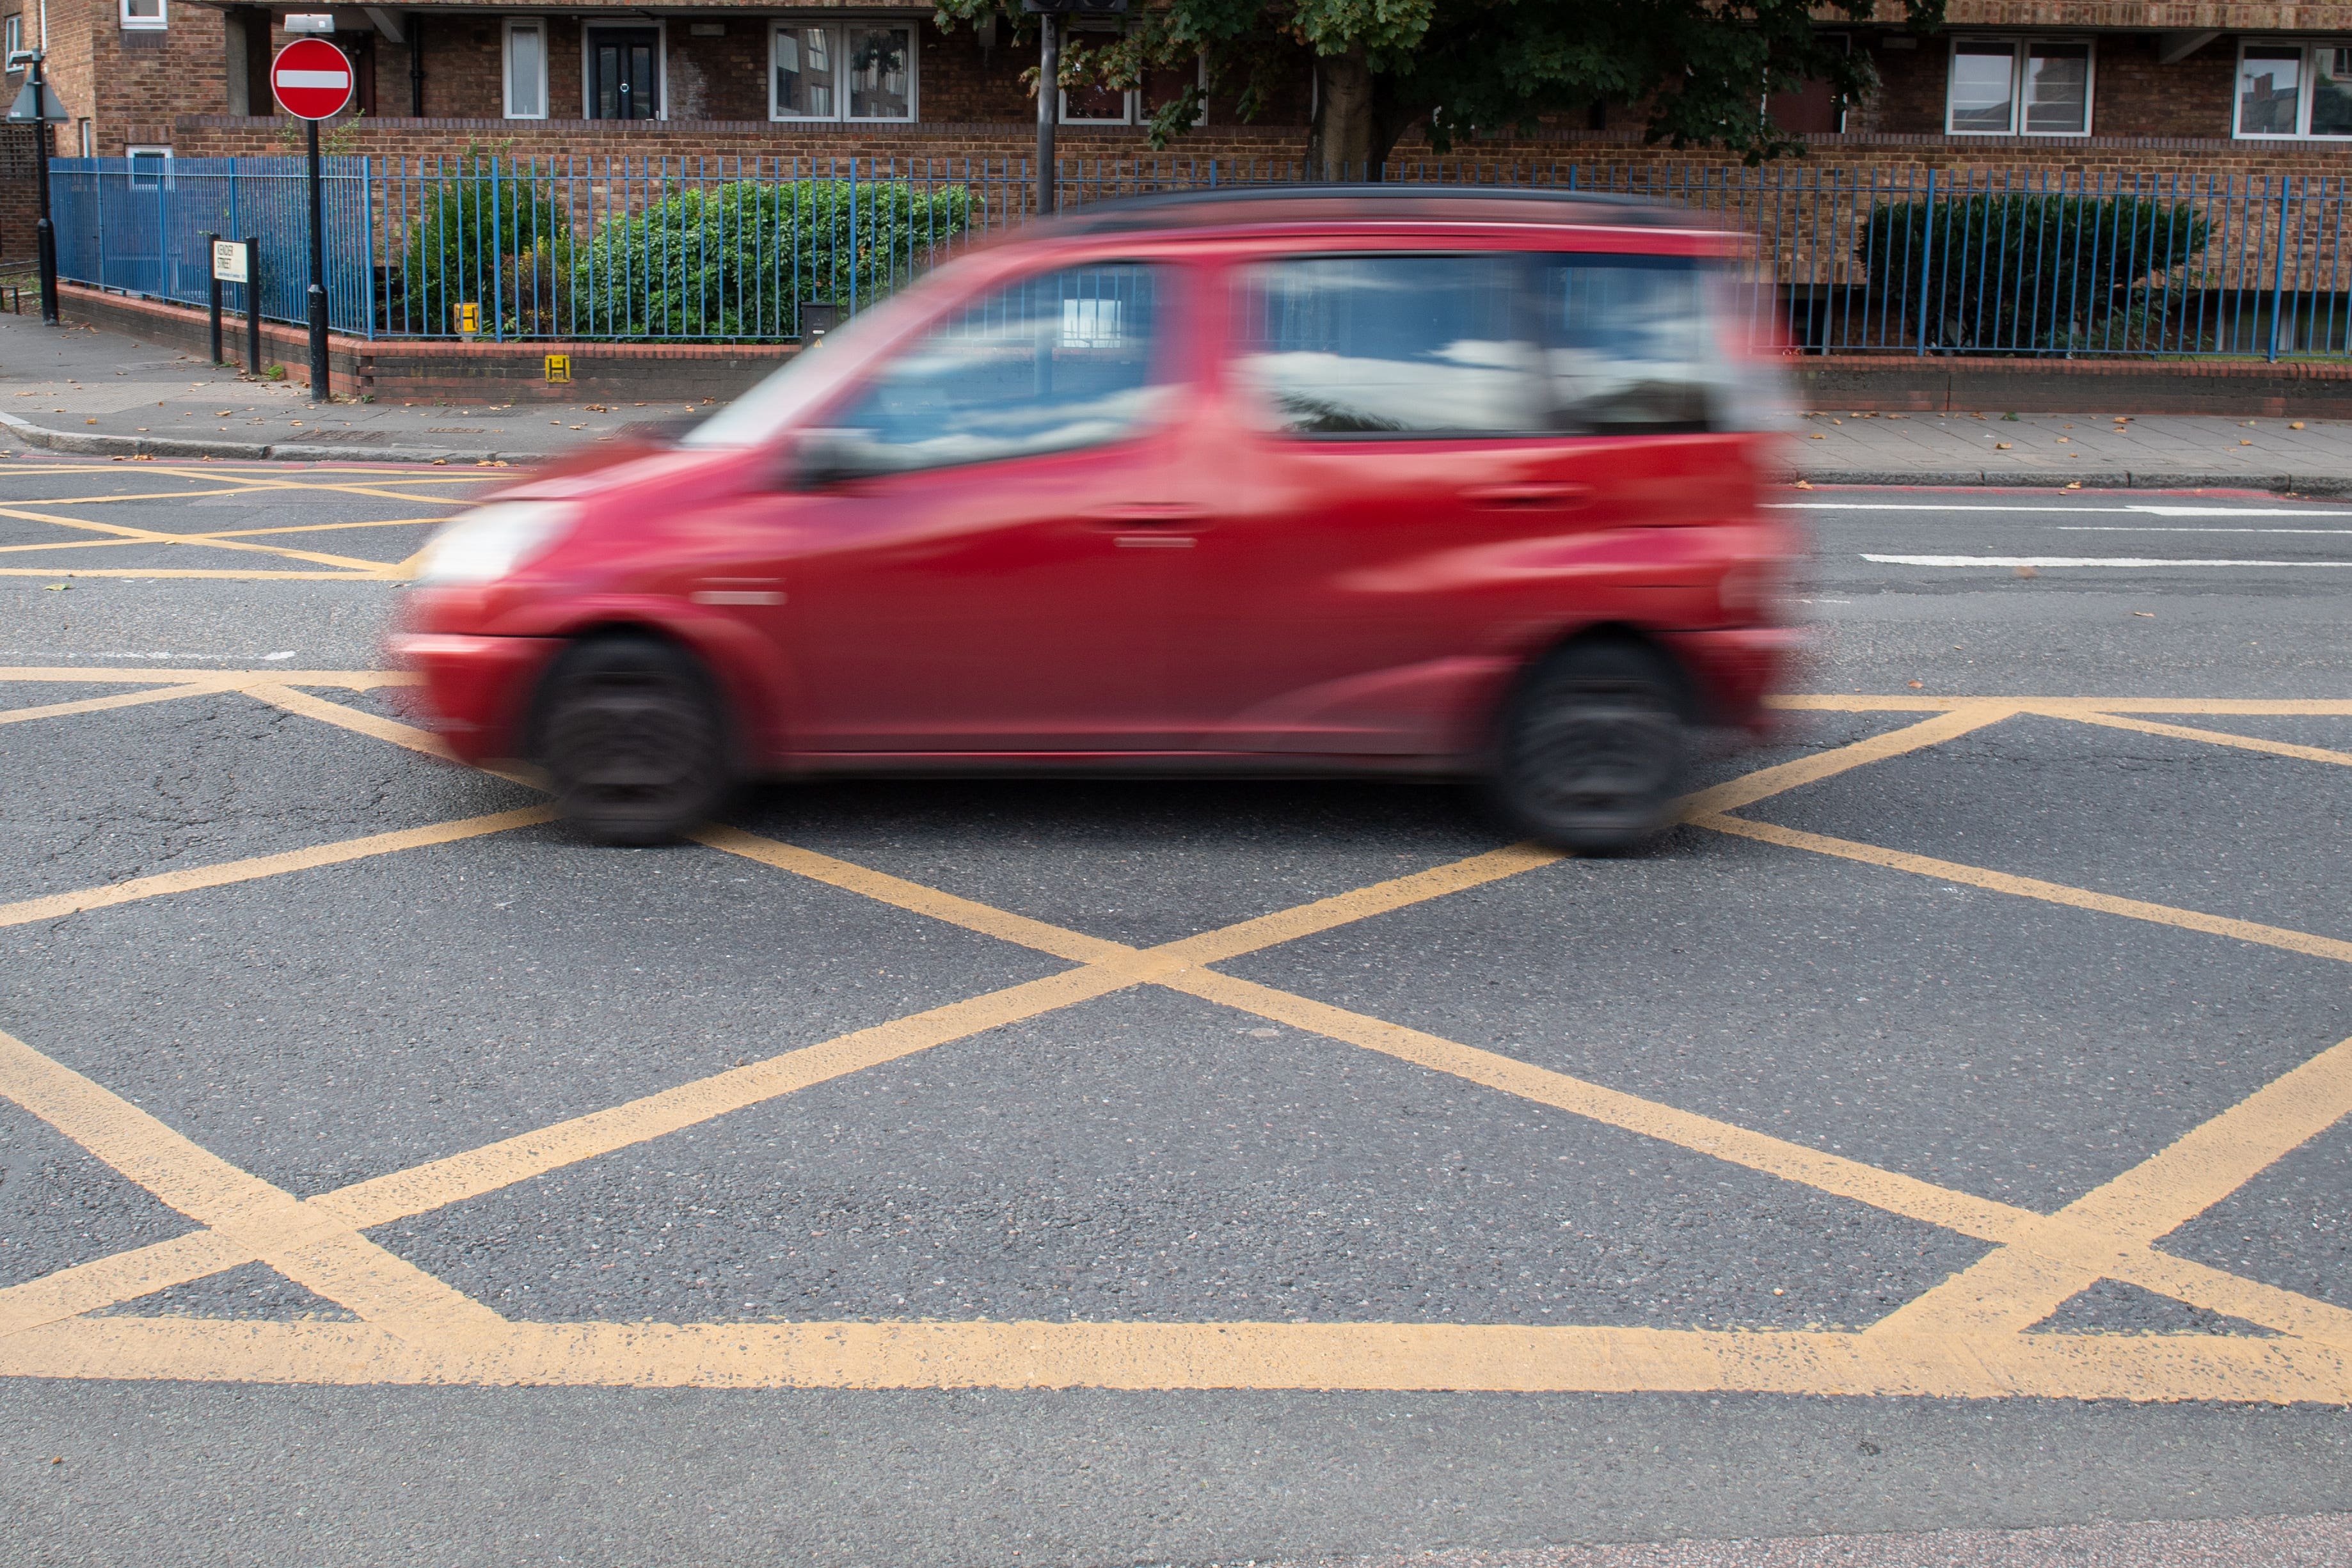 Councils now have the power to fine drivers up to £70 for ‘moving traffic violations’